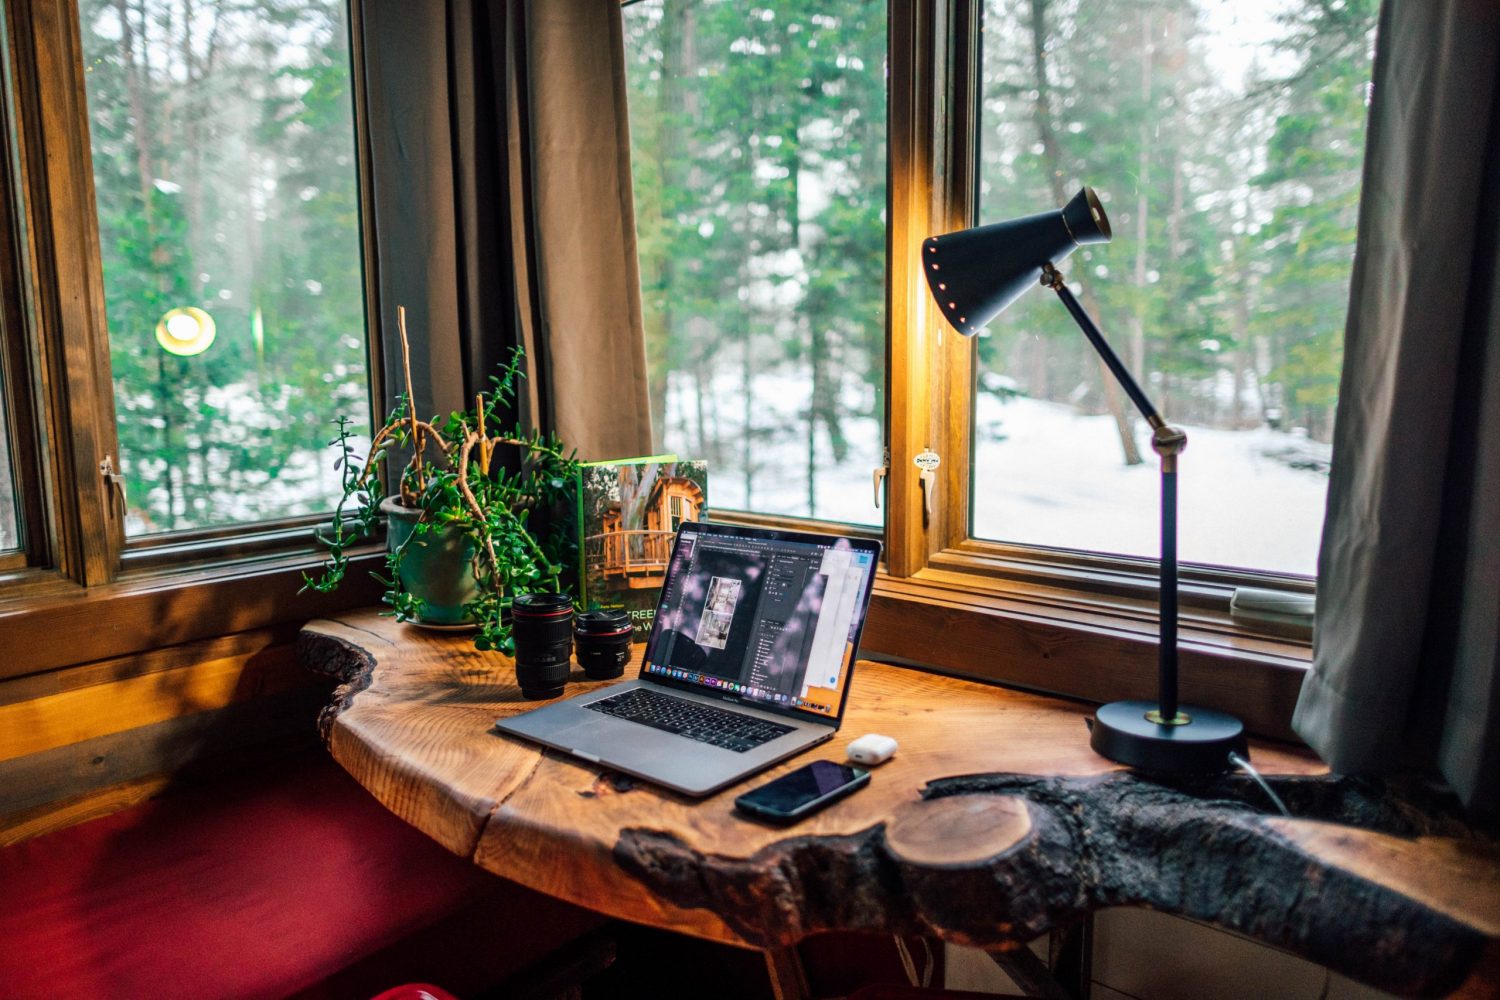 A live edge desk is pushed up against a bay window with a view of snow covered land and green fir trees. Atop the desk is a laptop, a desk lamp, and some small indoor plants.